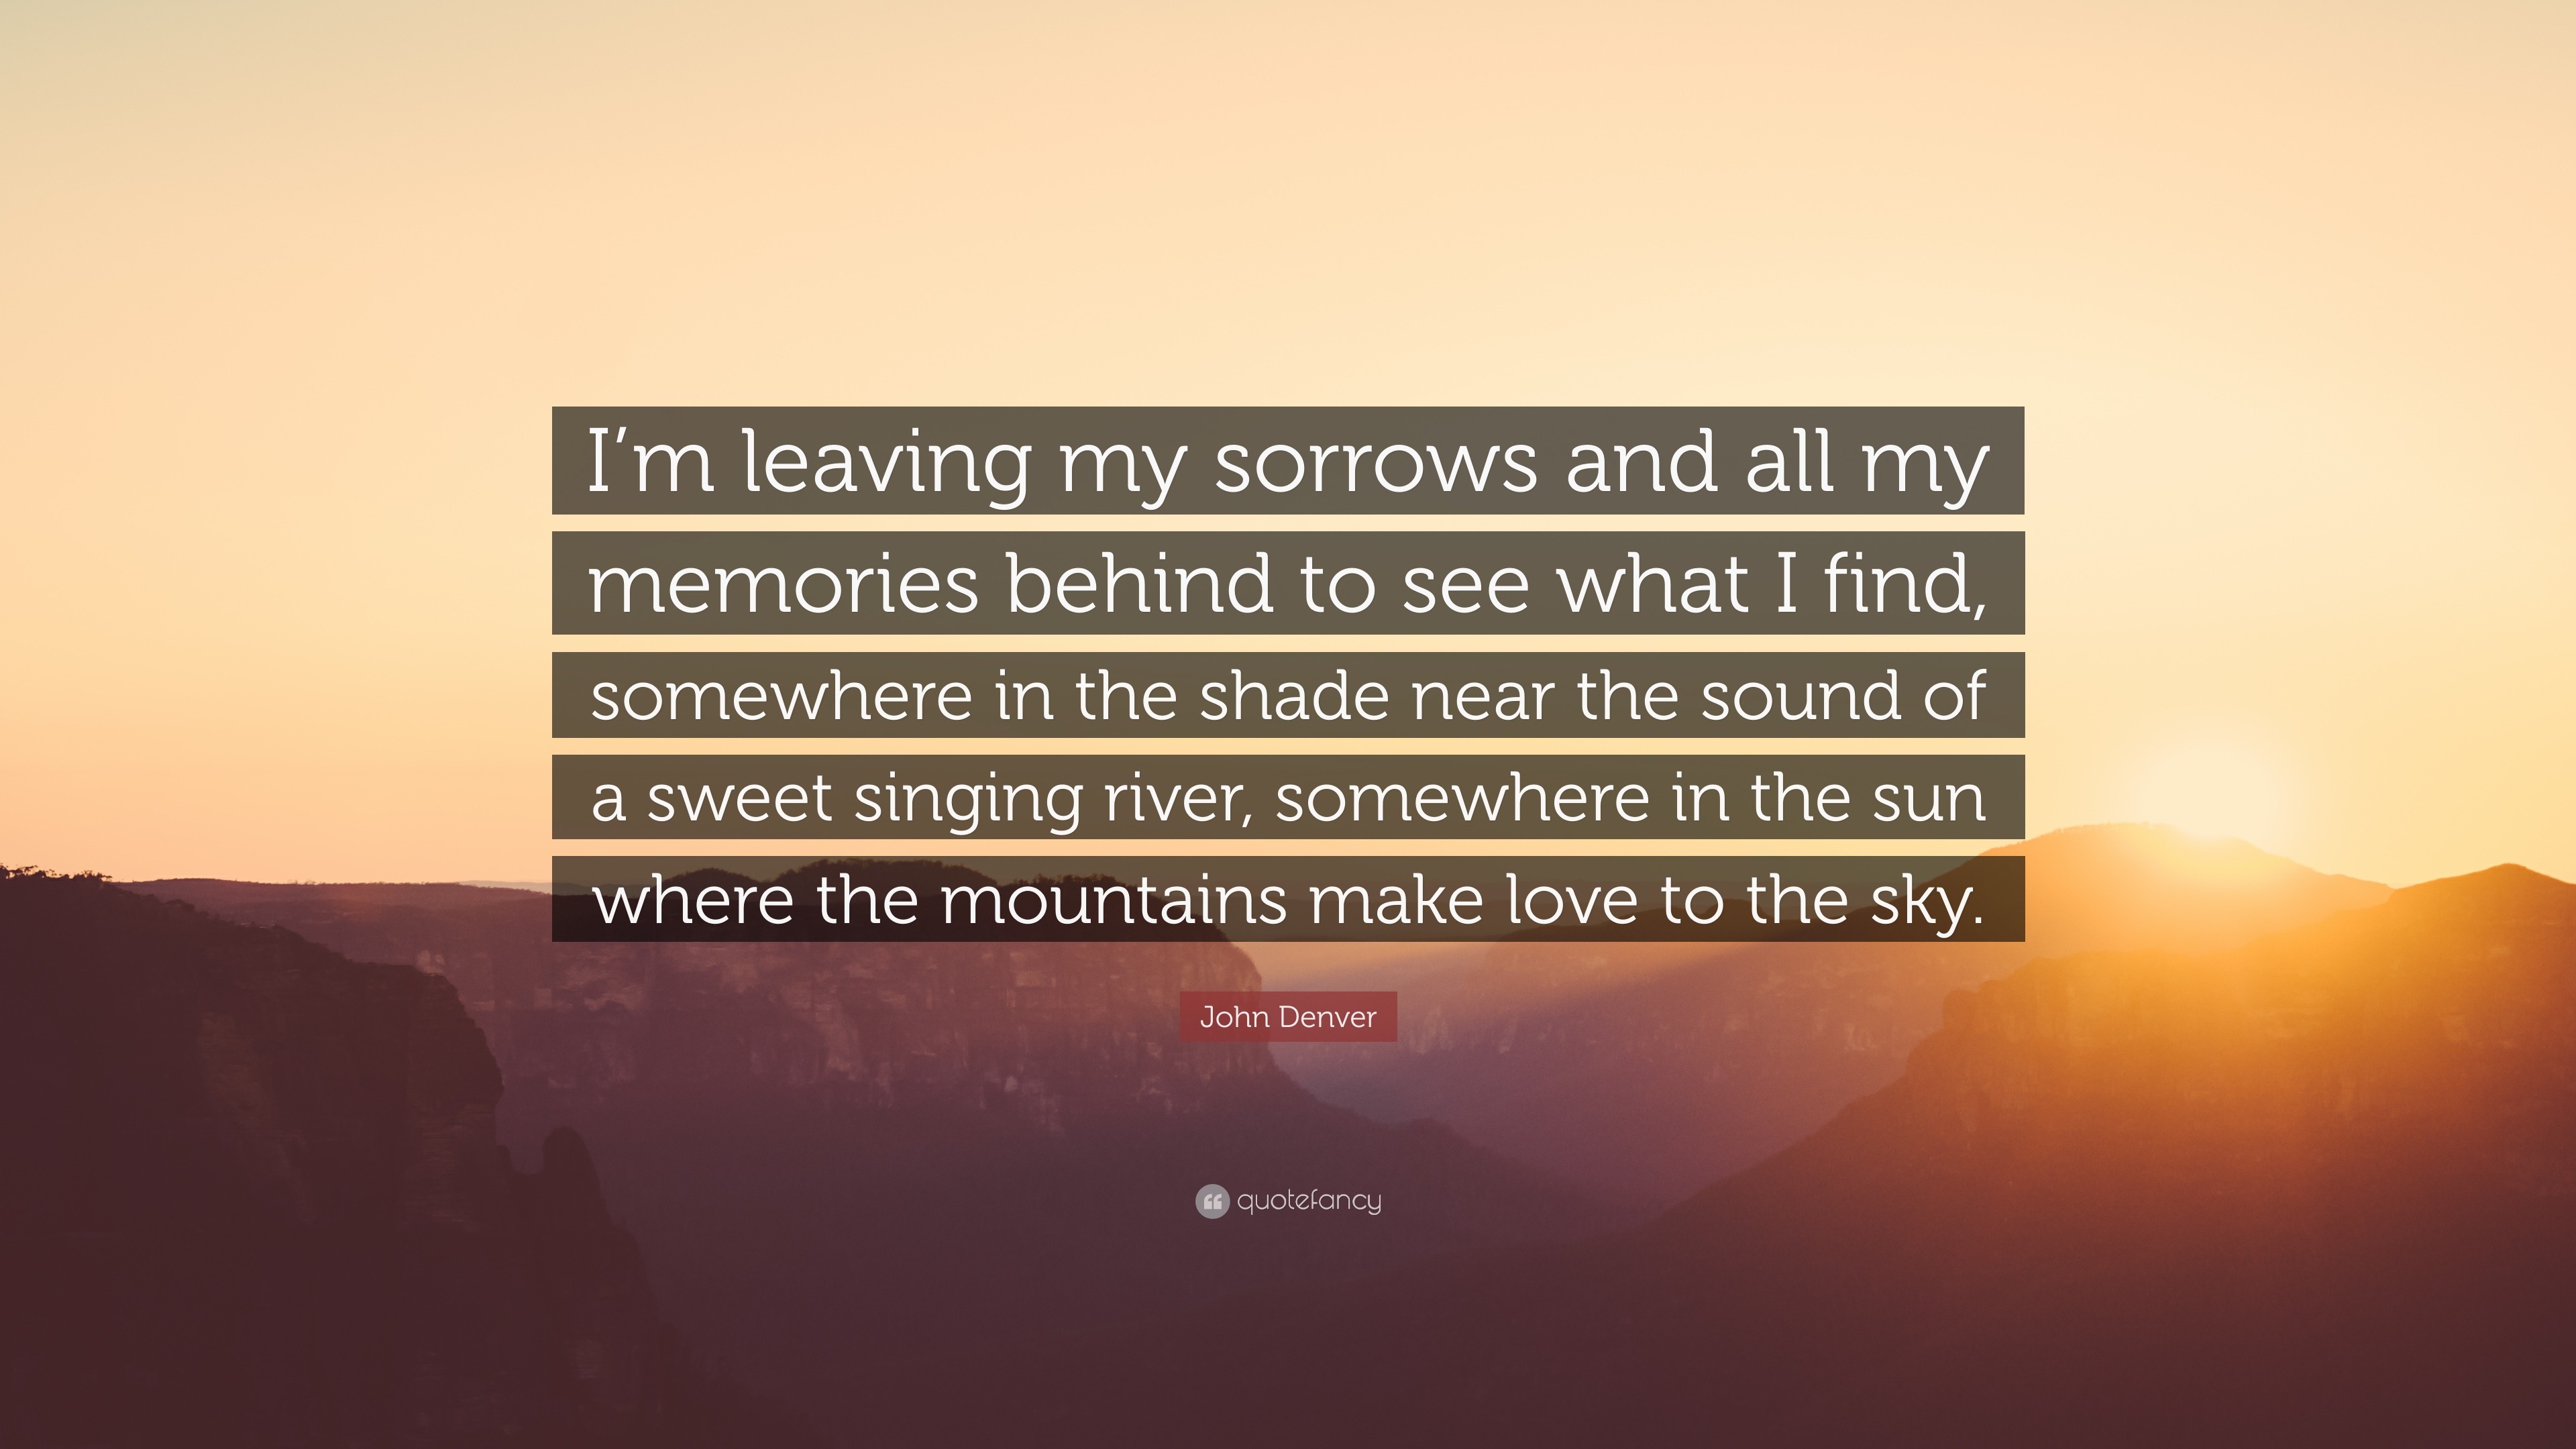 John Denver Quote “I m leaving my sorrows and all my memories behind